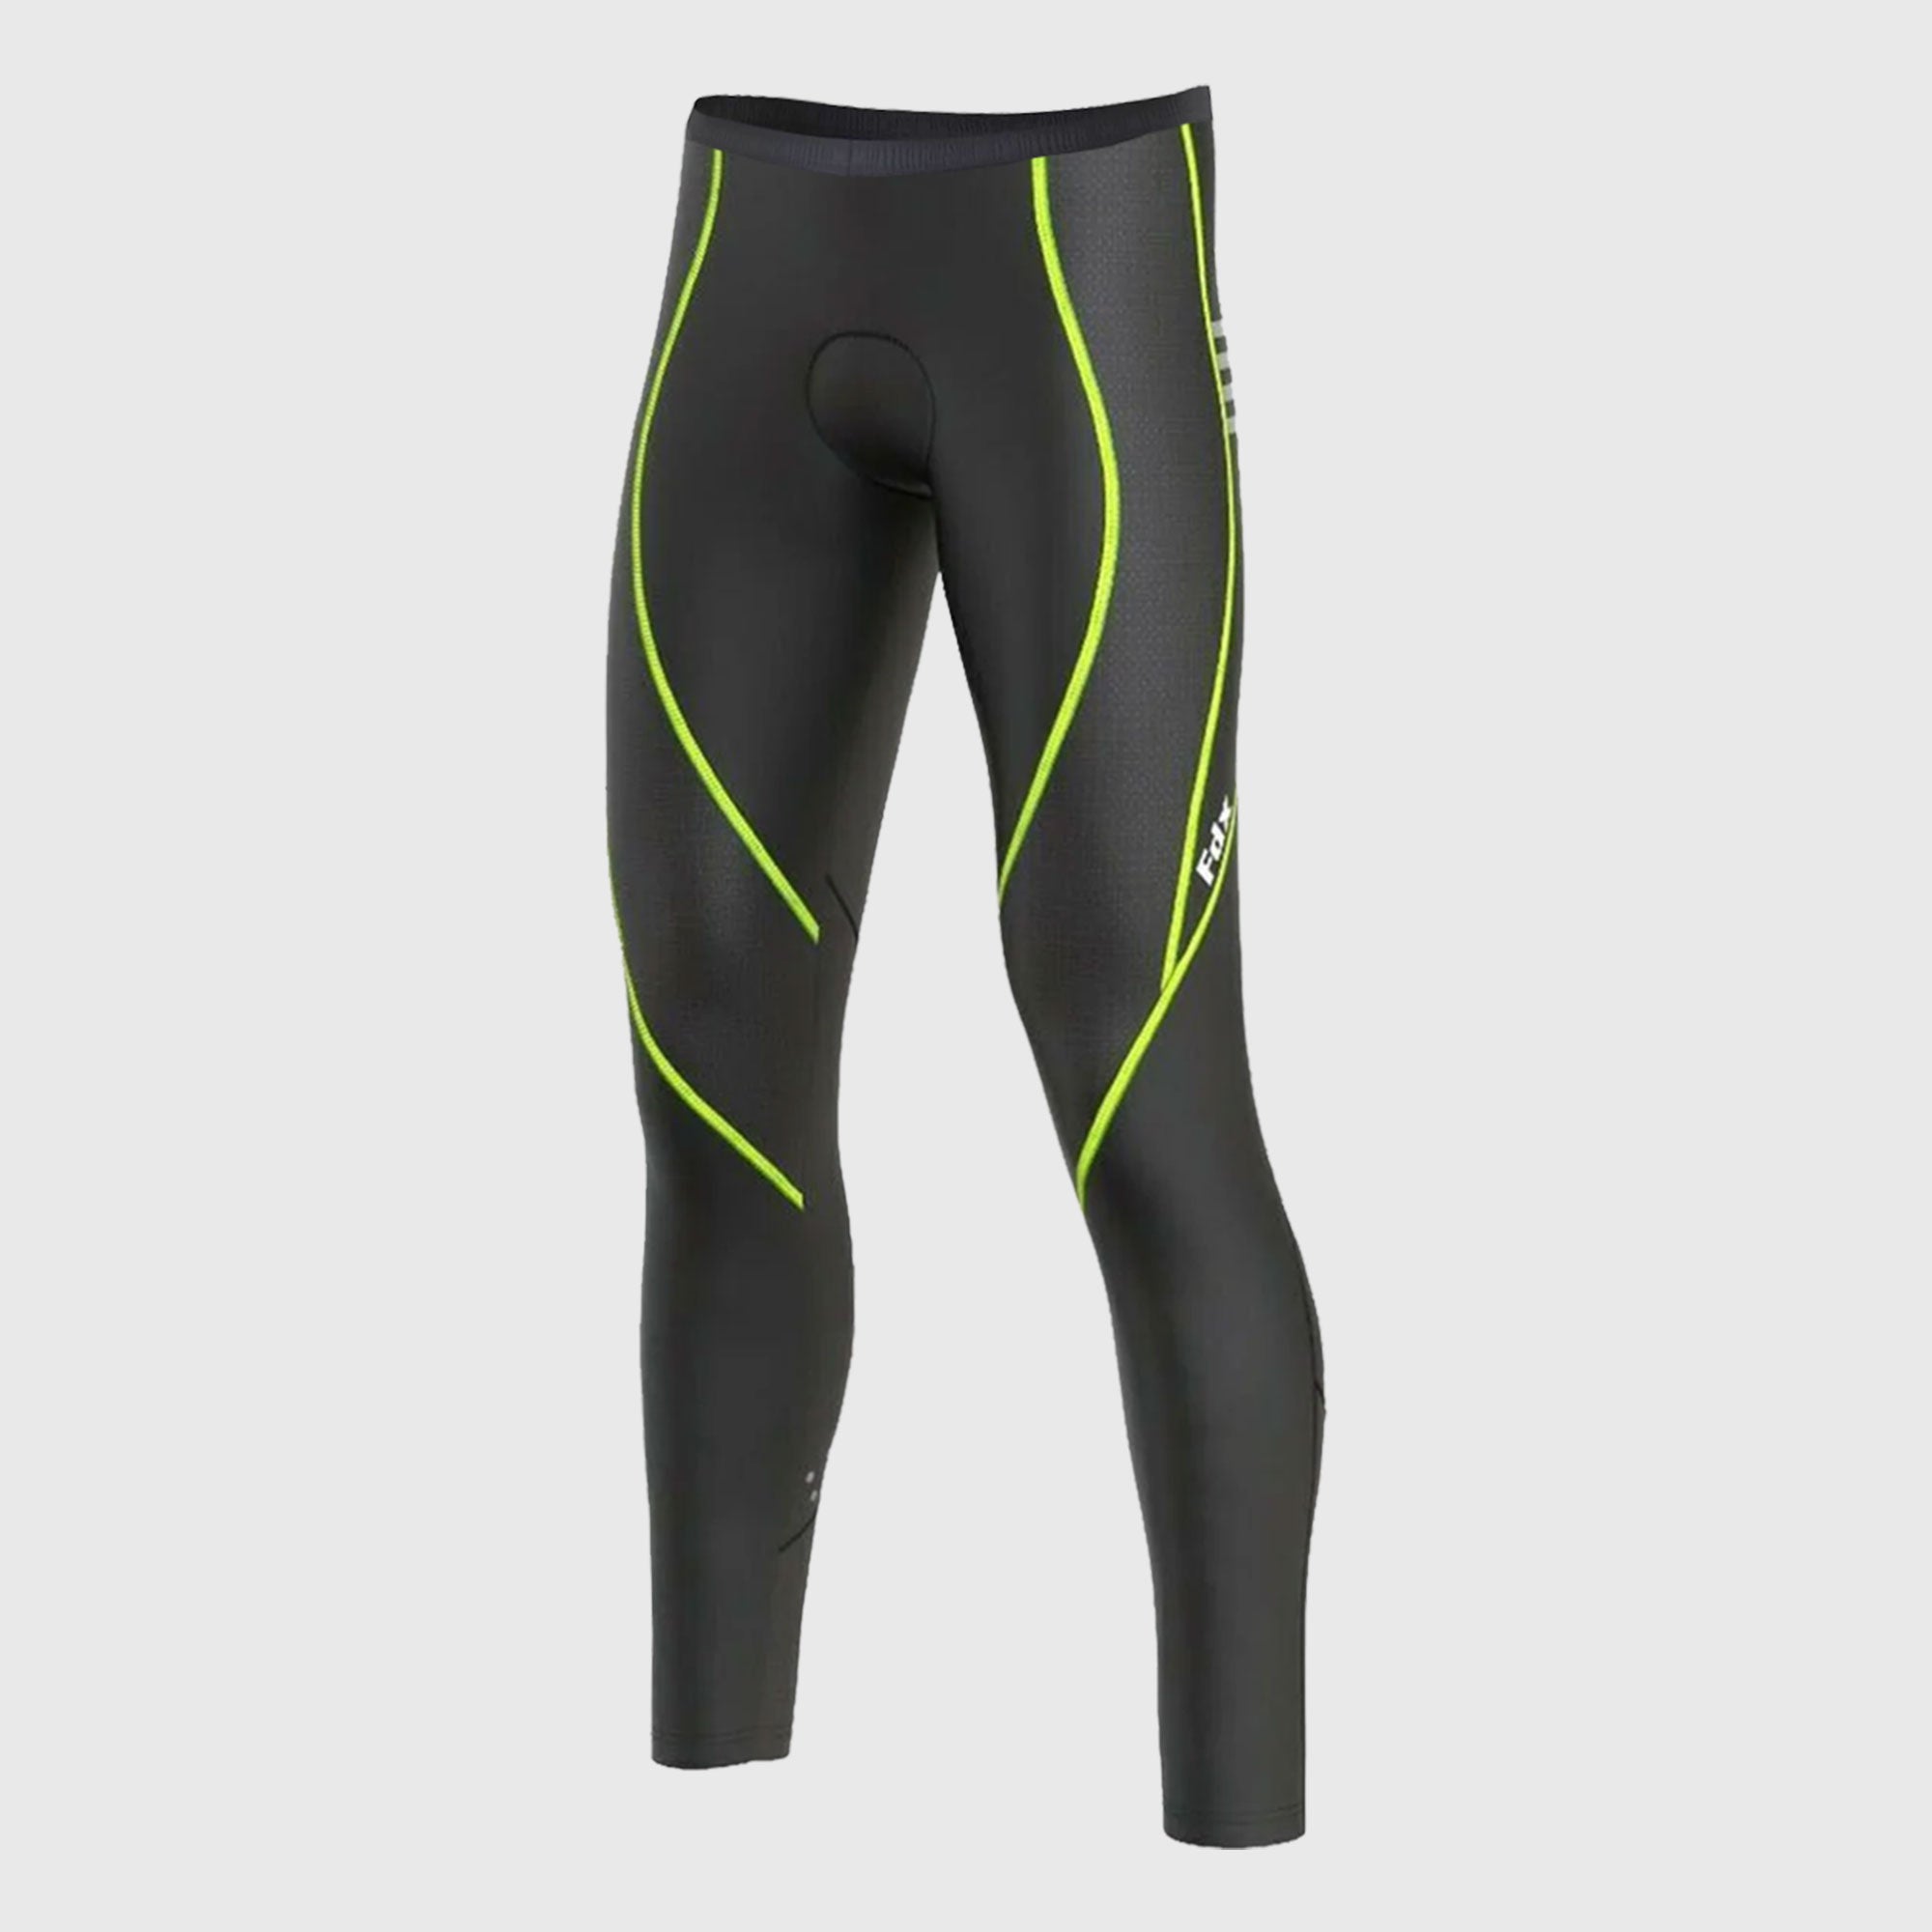 Fdx Divine Men's Fluorescent Yellow Thermal Padded Cycling Tights